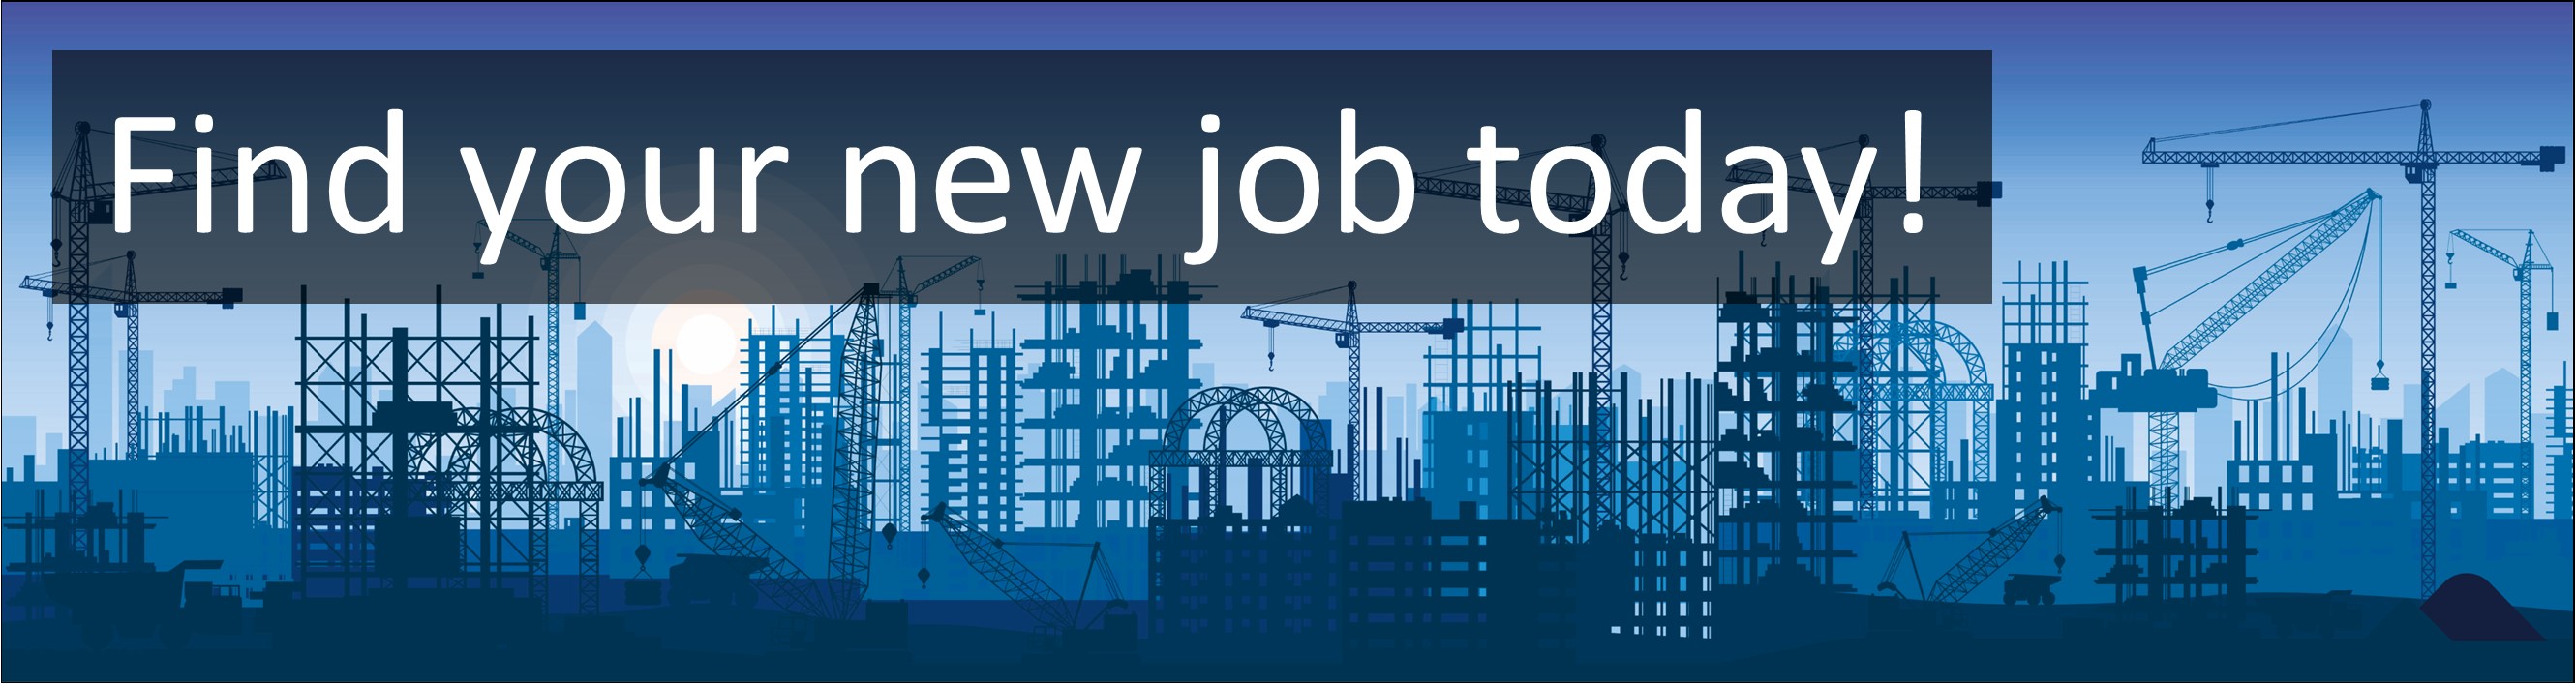 Construction & Trades Jobs. Manufacturing Plant Site Operative Jobs, Careers & Vacancies in Brandon, Suffolk Advertised by AWD online – Multi-Job Board Advertising and CV Sourcing Recruitment Services